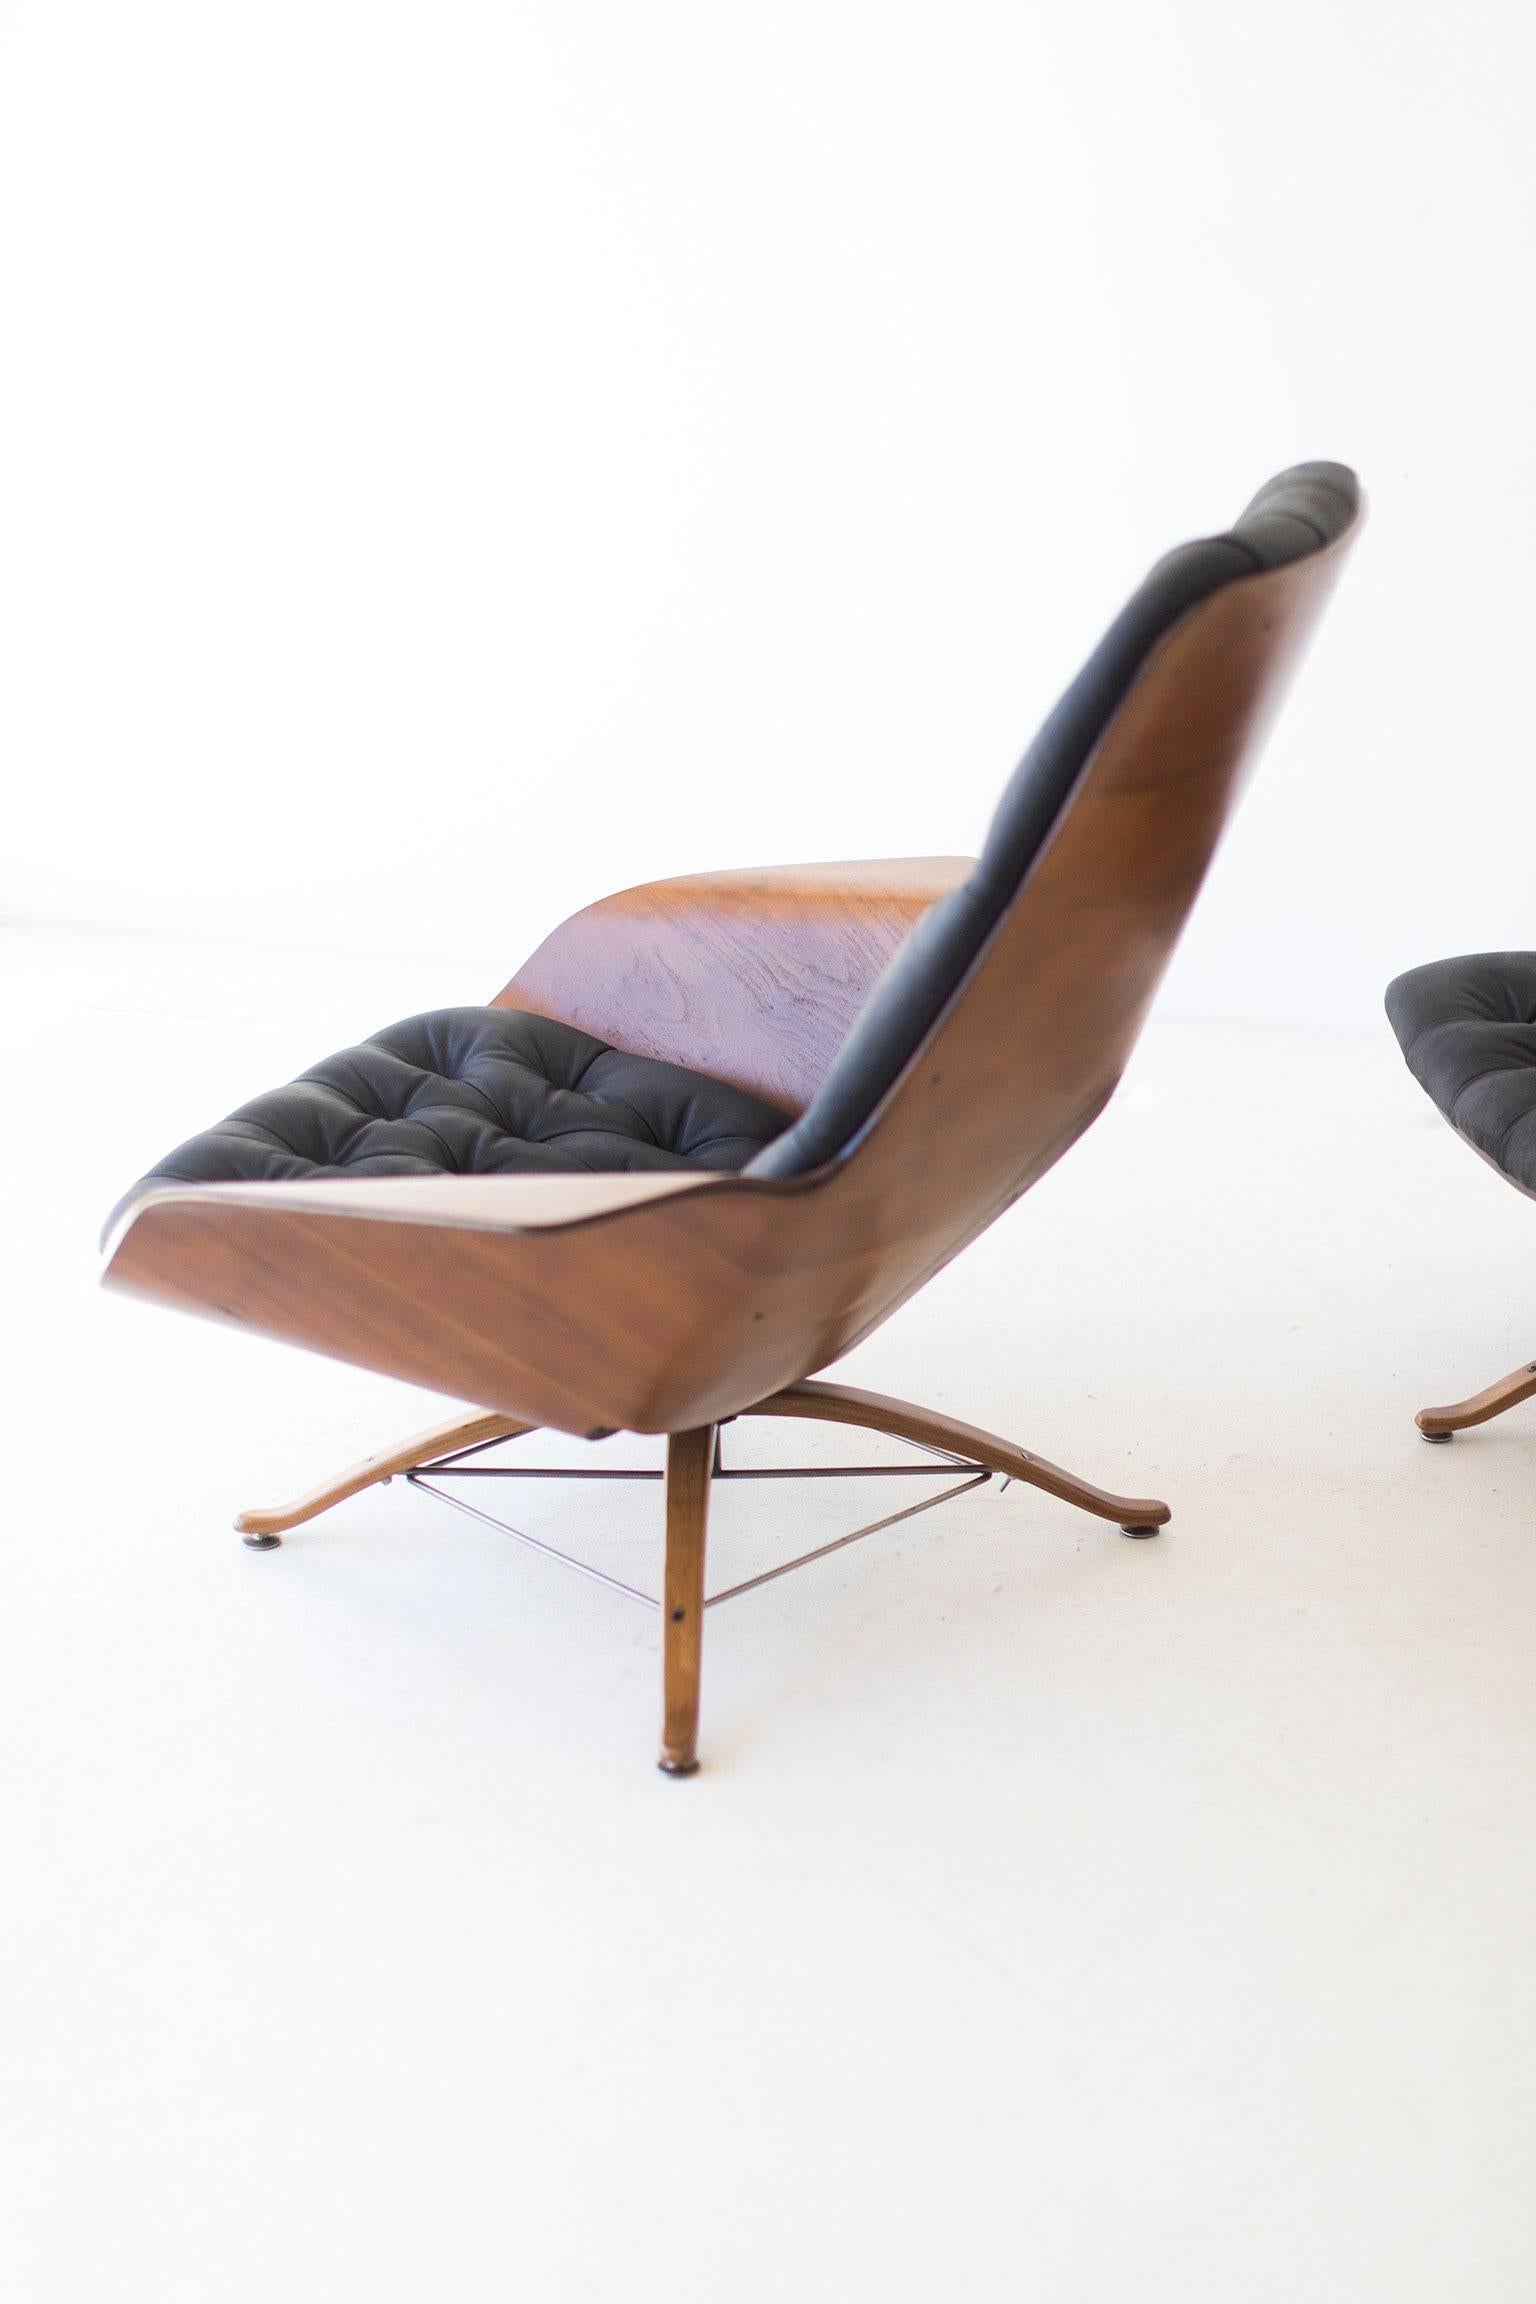 Leather George Mulhauser Lounge Chair and Ottoman for Plycraft